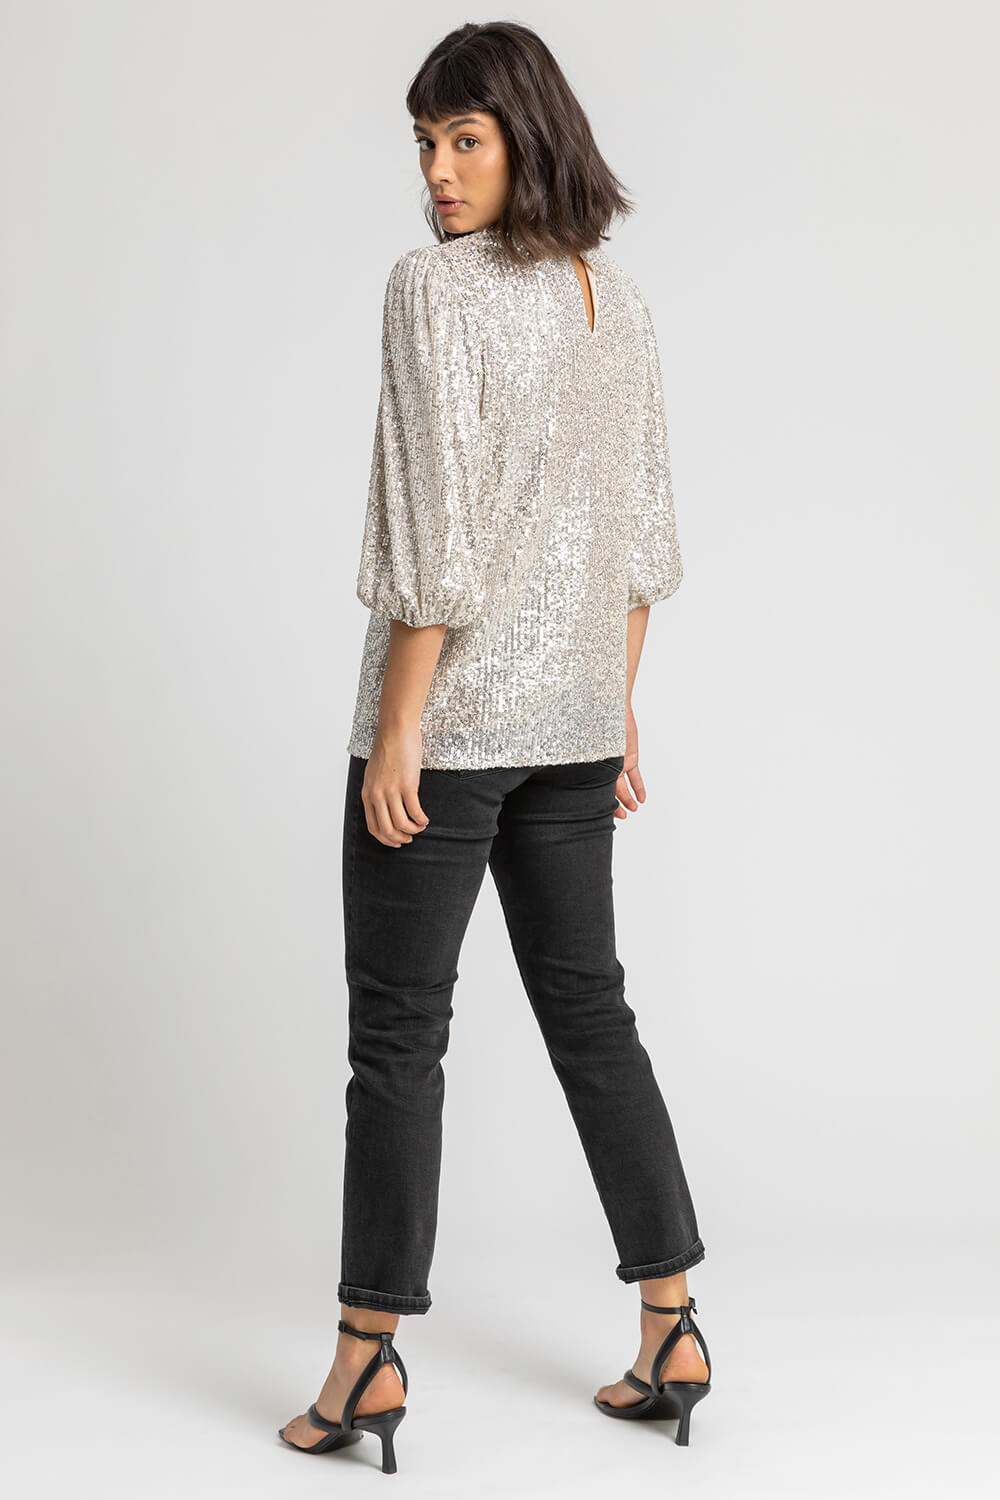 Silver Sequin Keyhole Neck Top, Image 2 of 4